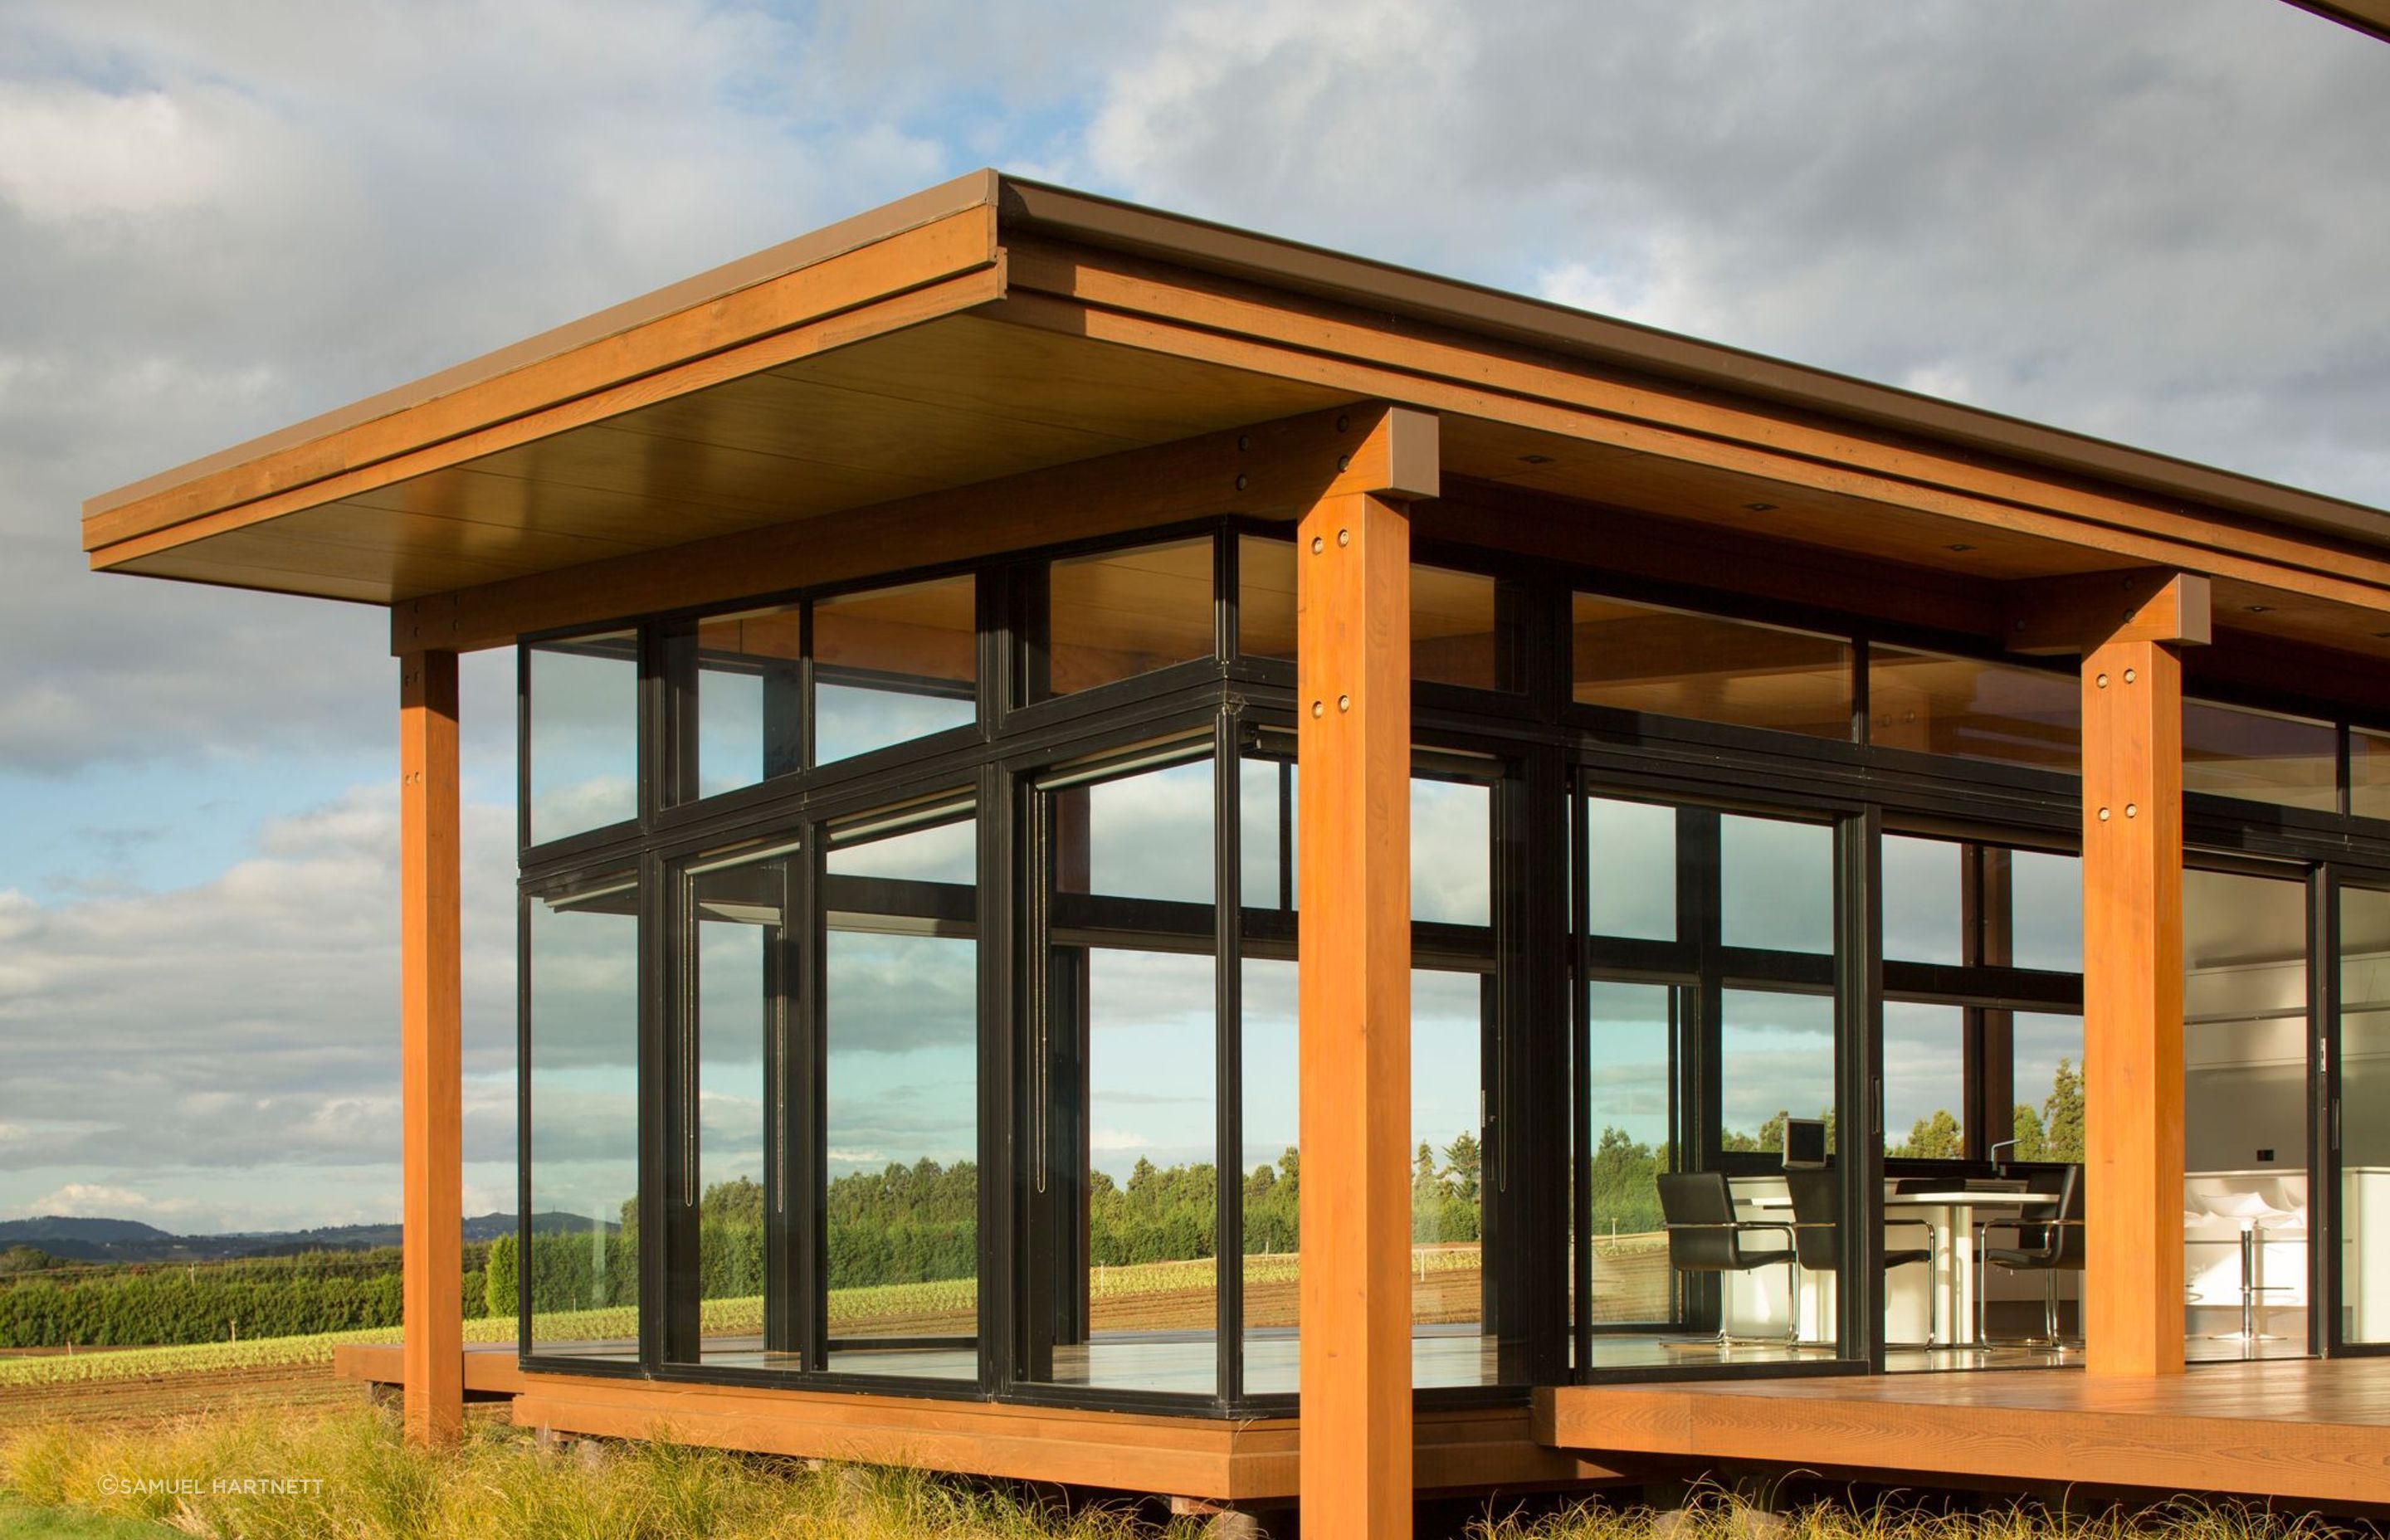 Generous overhangs provide shade while ample opening doors create cross ventilation for passive cooling.